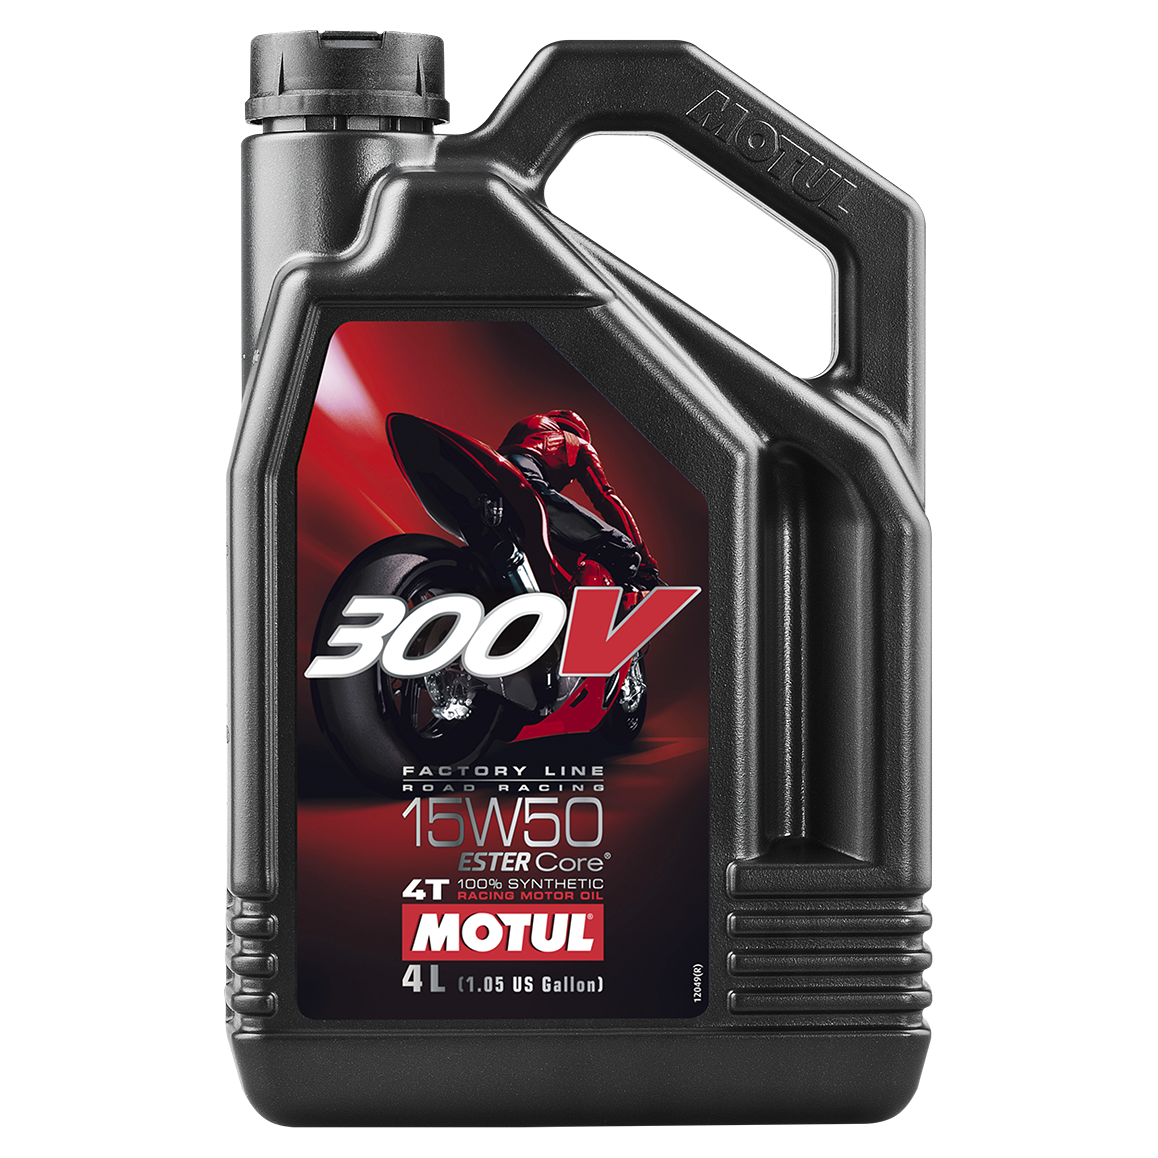 300V 4T COMPETITION SYNTHETIC OIL 15W50 4-LITER